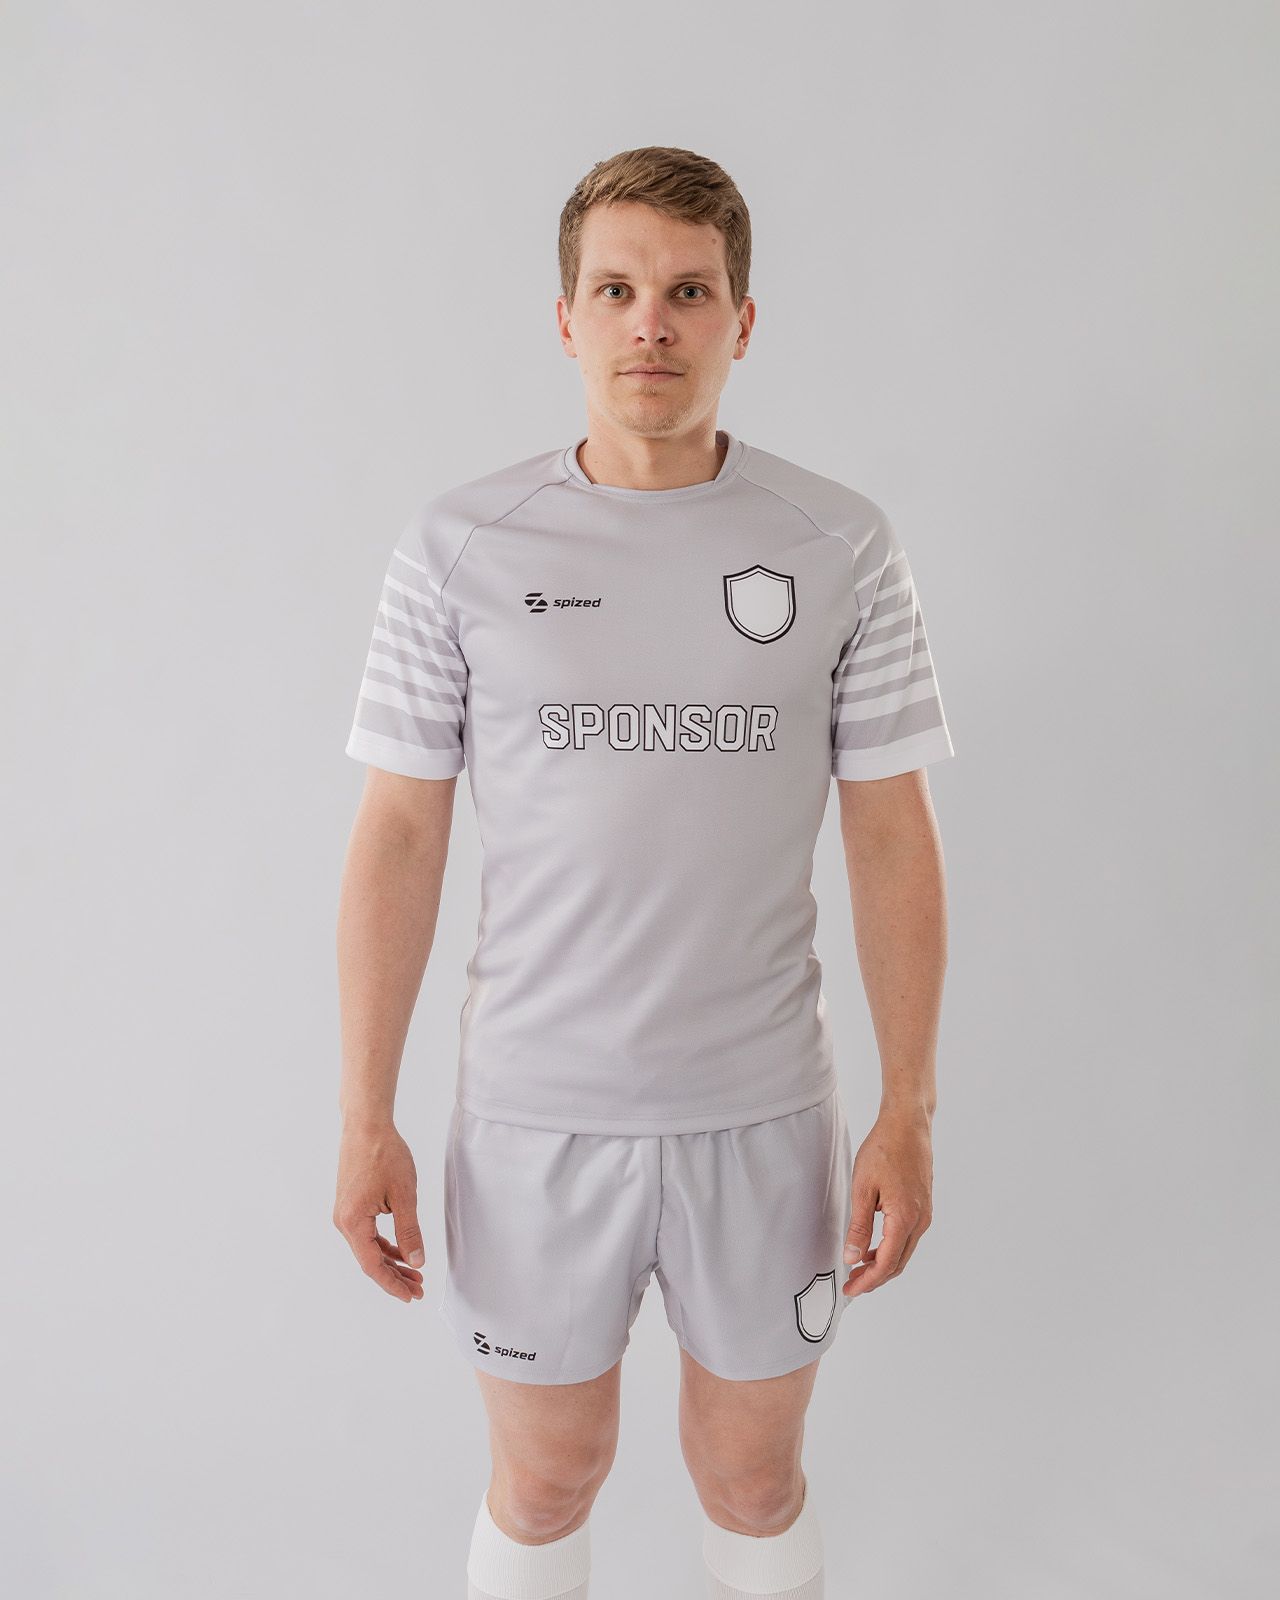 Nelson men's rugby jersey 